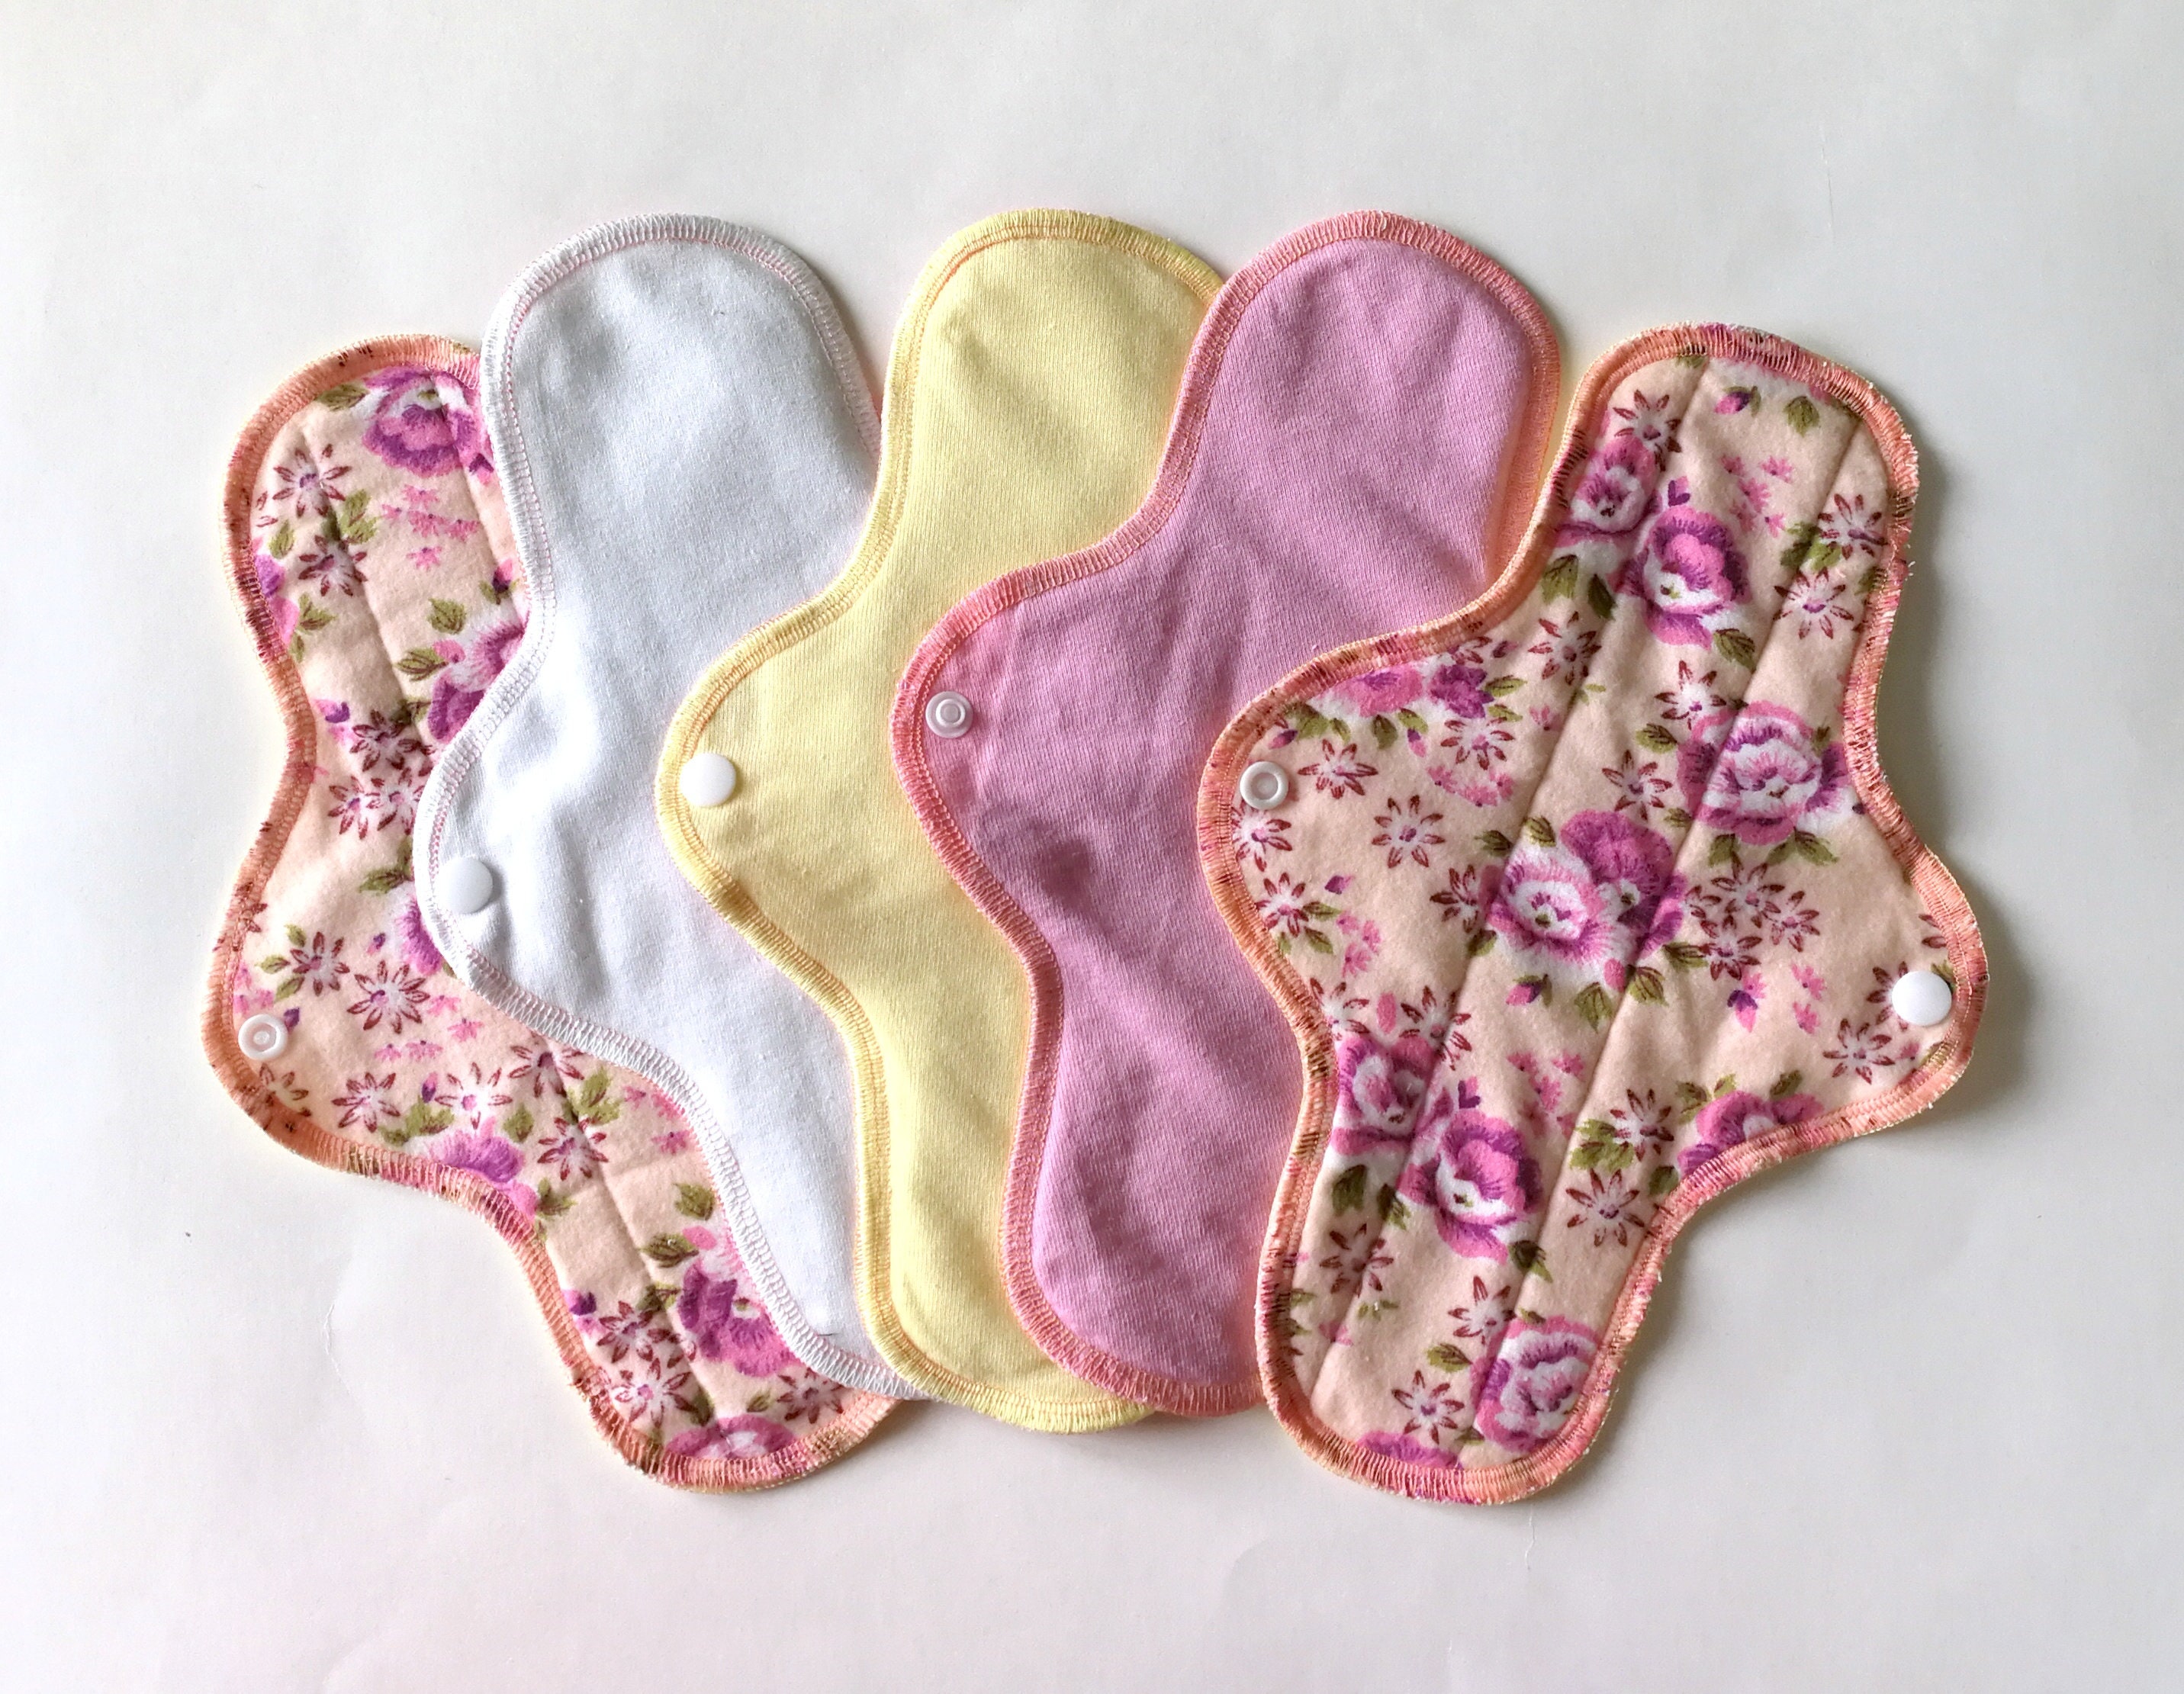 Tampon Tribe - Reusable Menstrual Pads (2 Pack) - Zero Waste Organic Cotton  Cloth Pads - Washable, Leak Free, Odor Free, Toxin Free, Eco Friendly